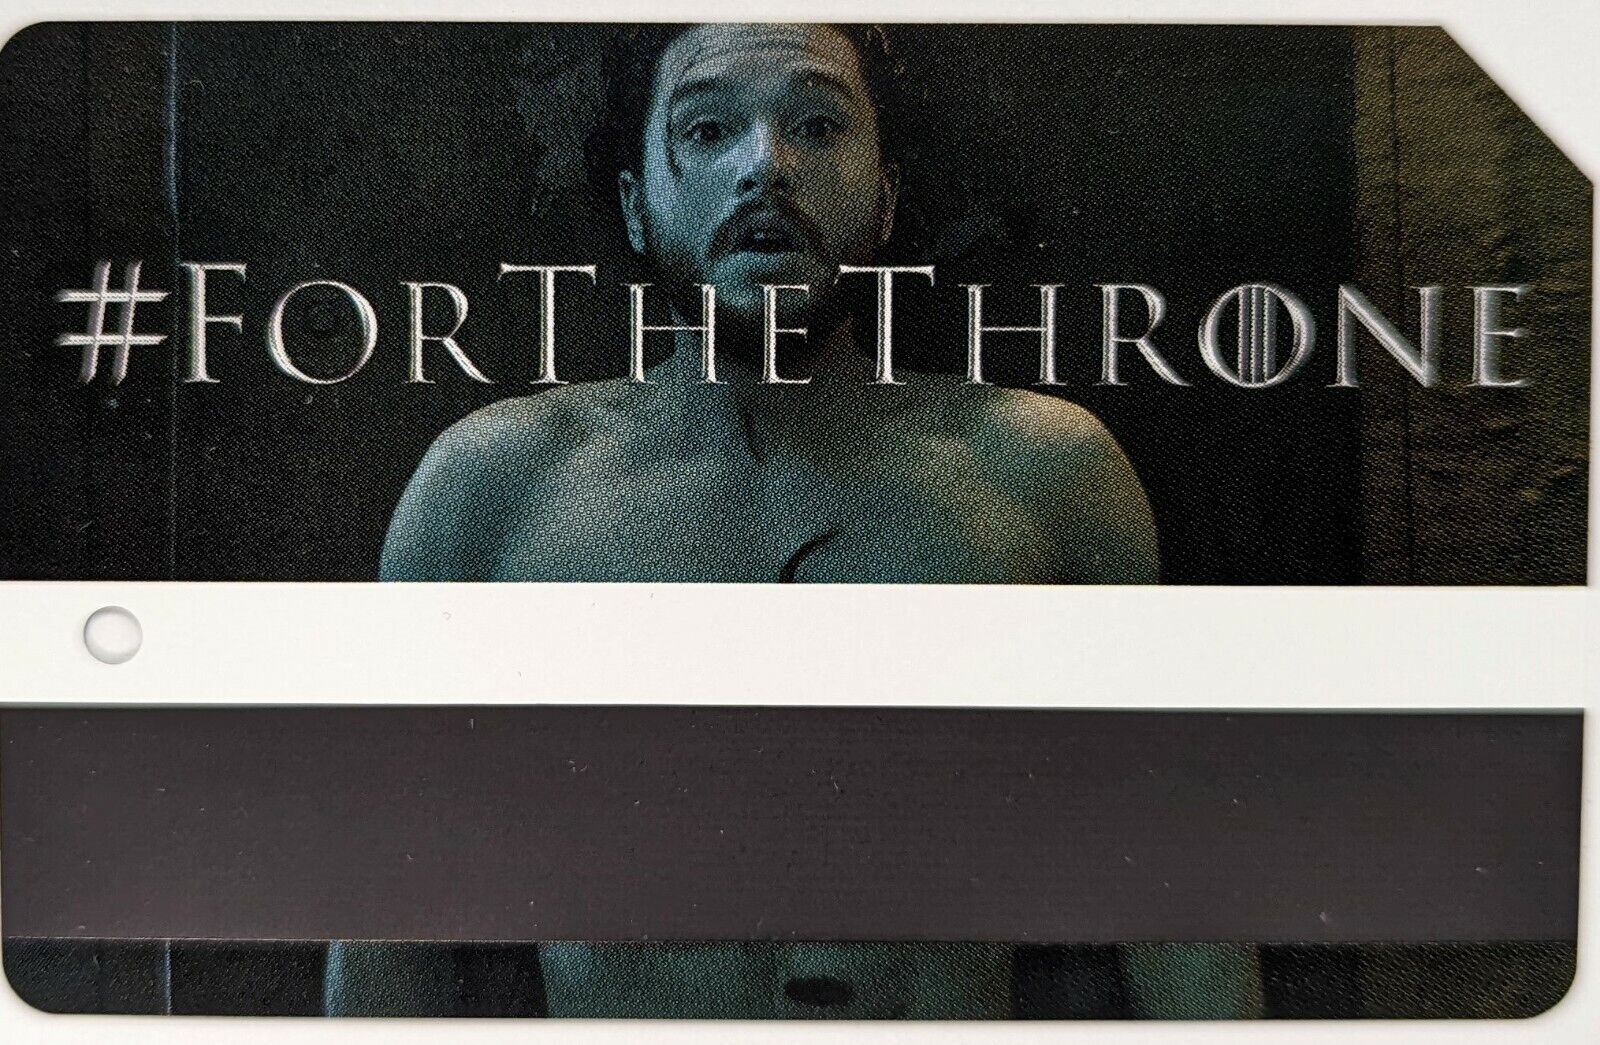 Game of Throne, HBO Ver4 - NYC MetroCard-Expired, Mint condition